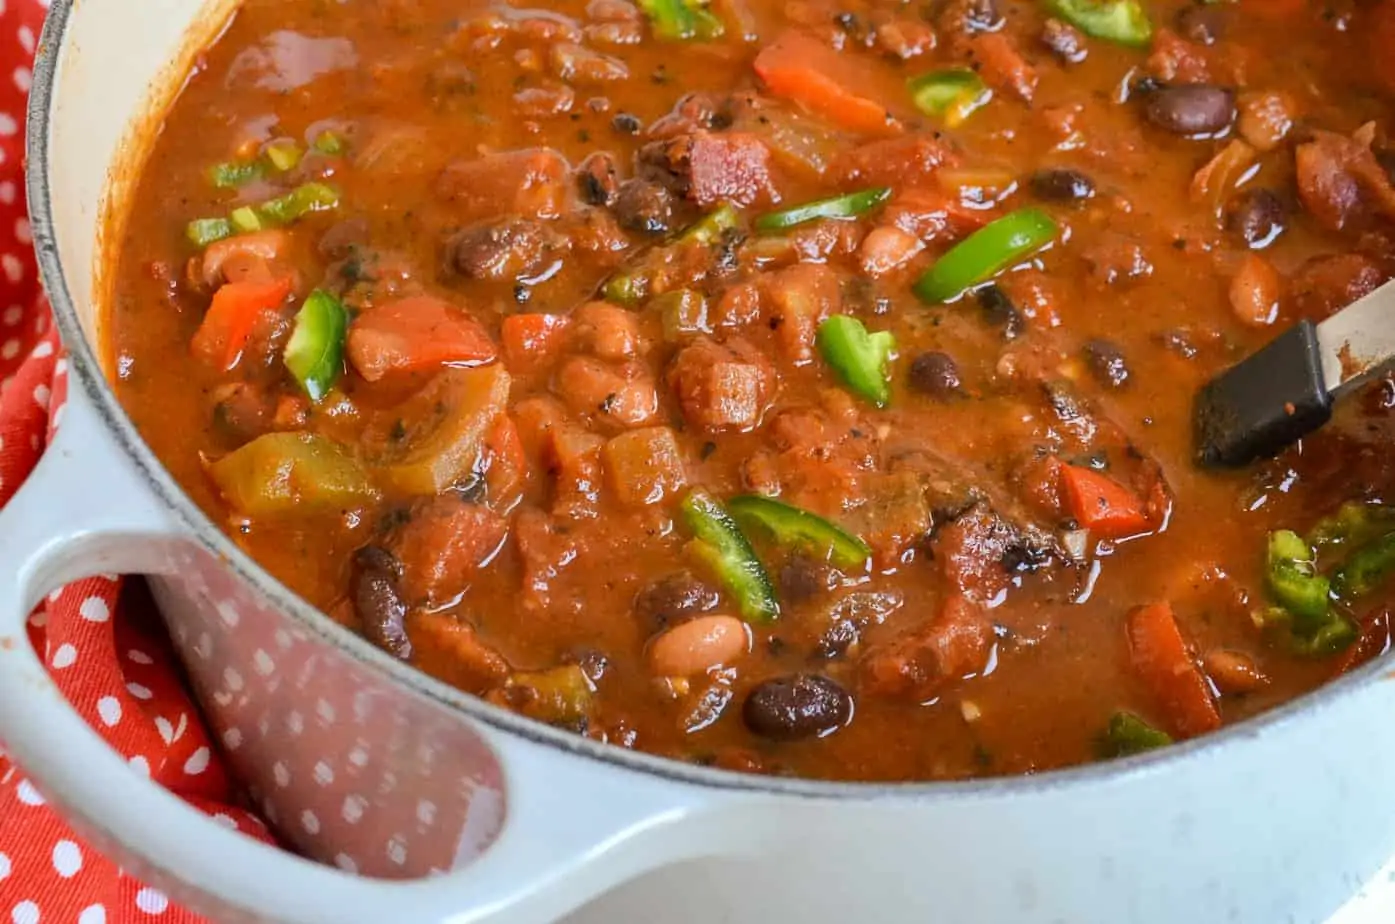 Vegetarian Chili with Beans